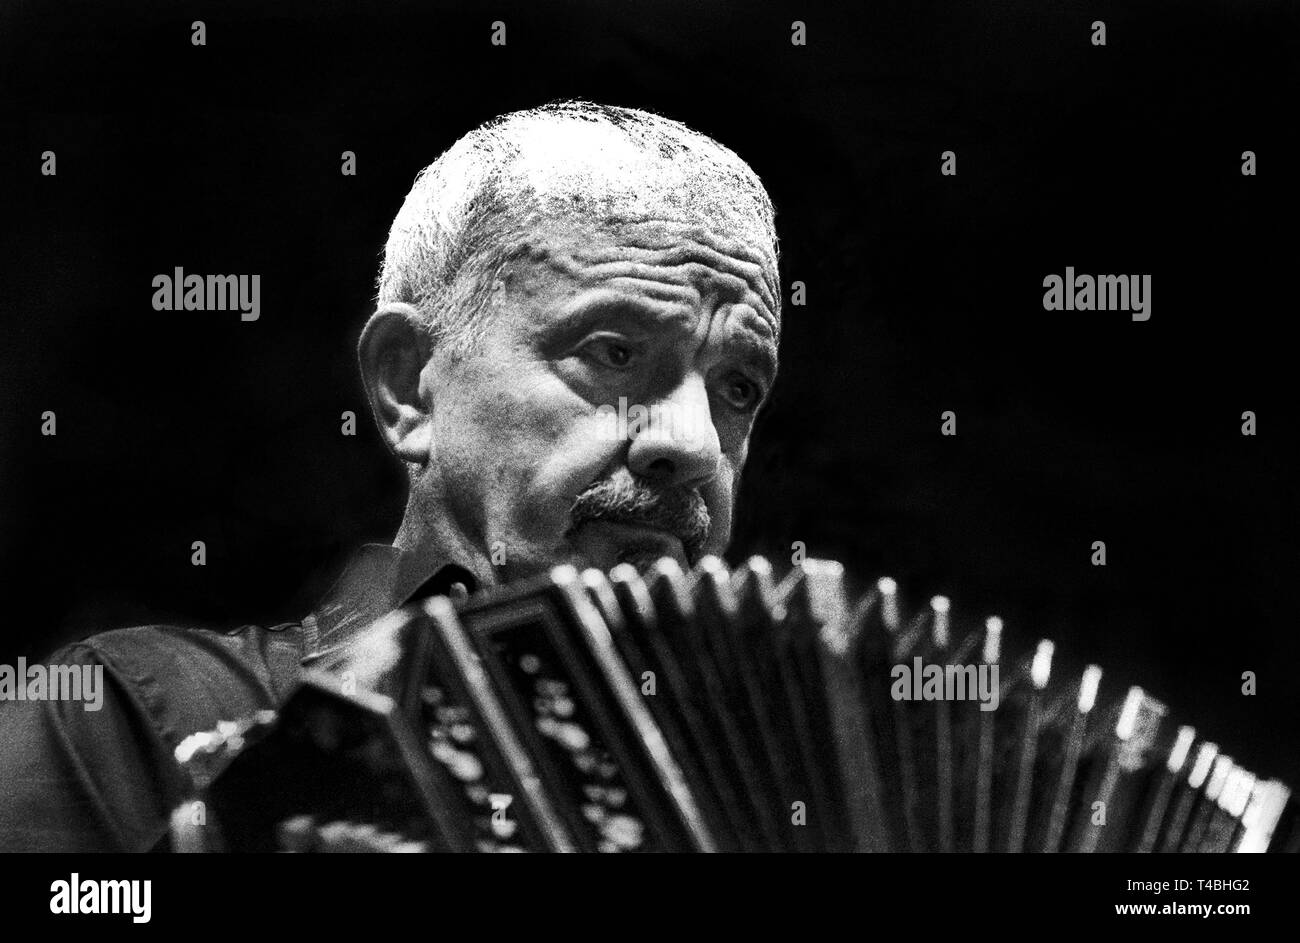 An undated picture shows Argentine tango composer and bandoneon player, Astor Piazzolla playing his bandoneon in Buenos Aires, Argentina. Piazzolla was born in Mar del Plata, Argentina in 1921, 90 years ago. His oeuvre revolutionized the traditional tango into a 'Nuevo Tango' incorporating elements from jazz and clasical music. Photo: Claudio Herdener/dpa | usage worldwide Stock Photo